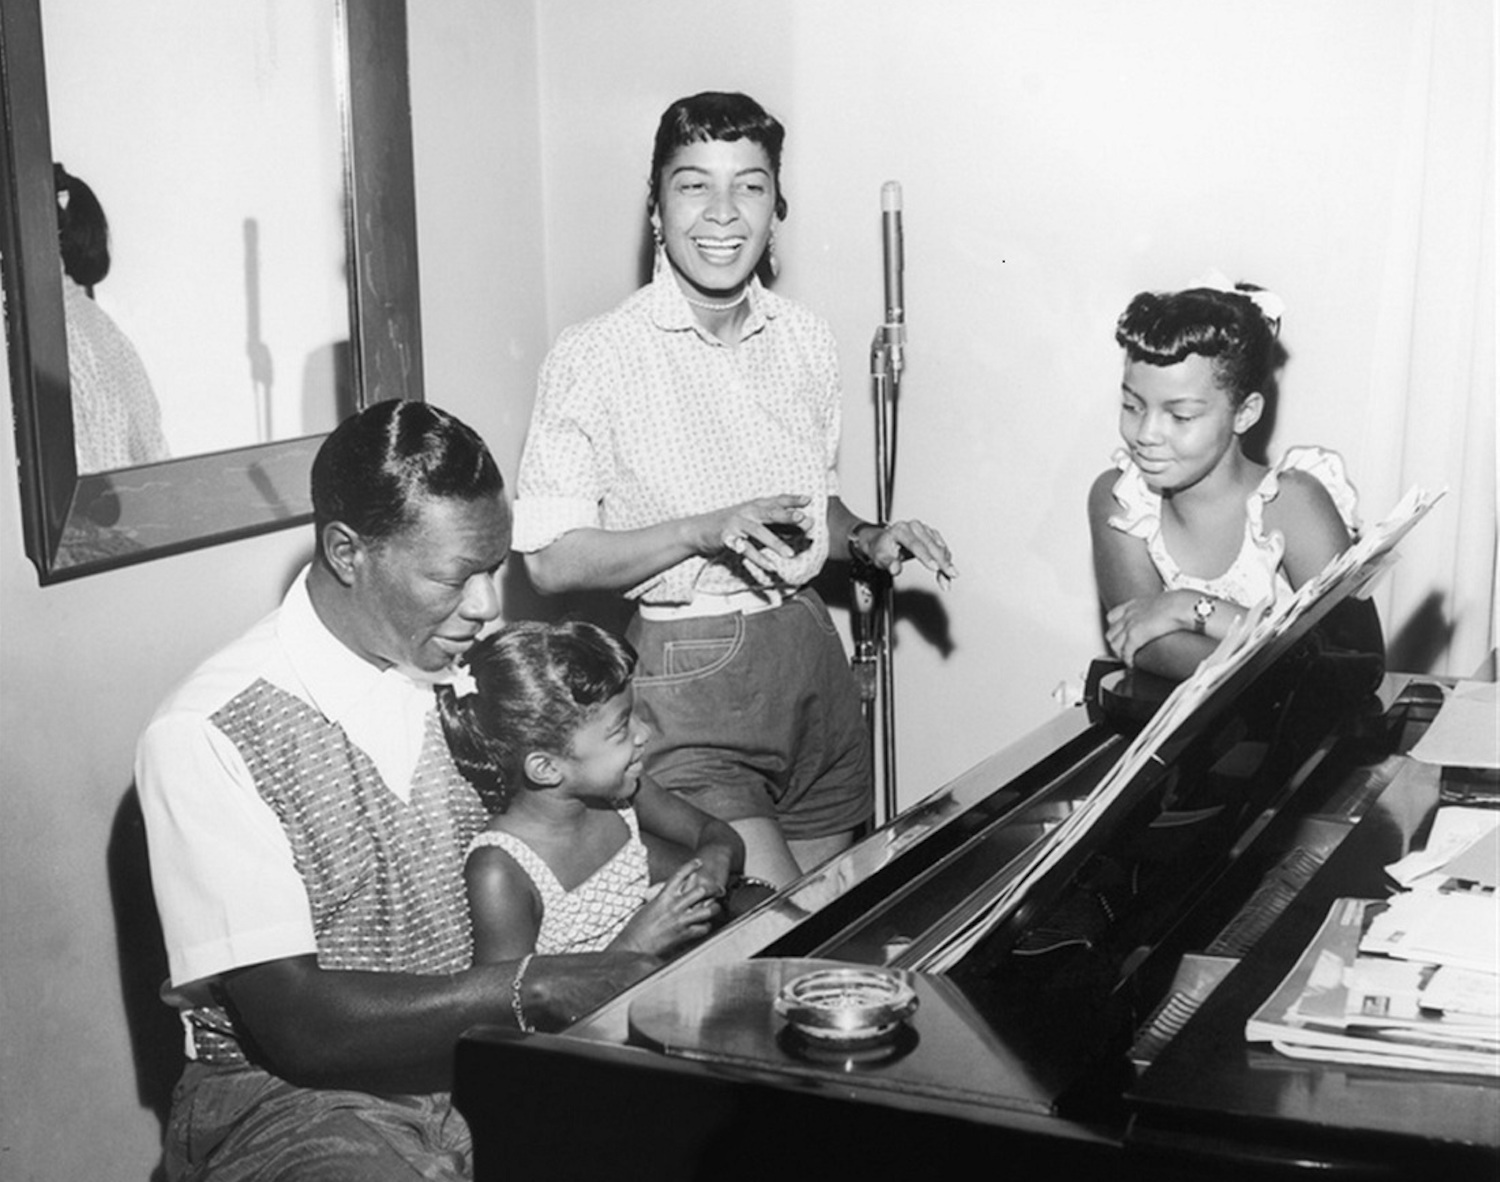 When Nat King Cole moved in | Curbed, Los Angeles